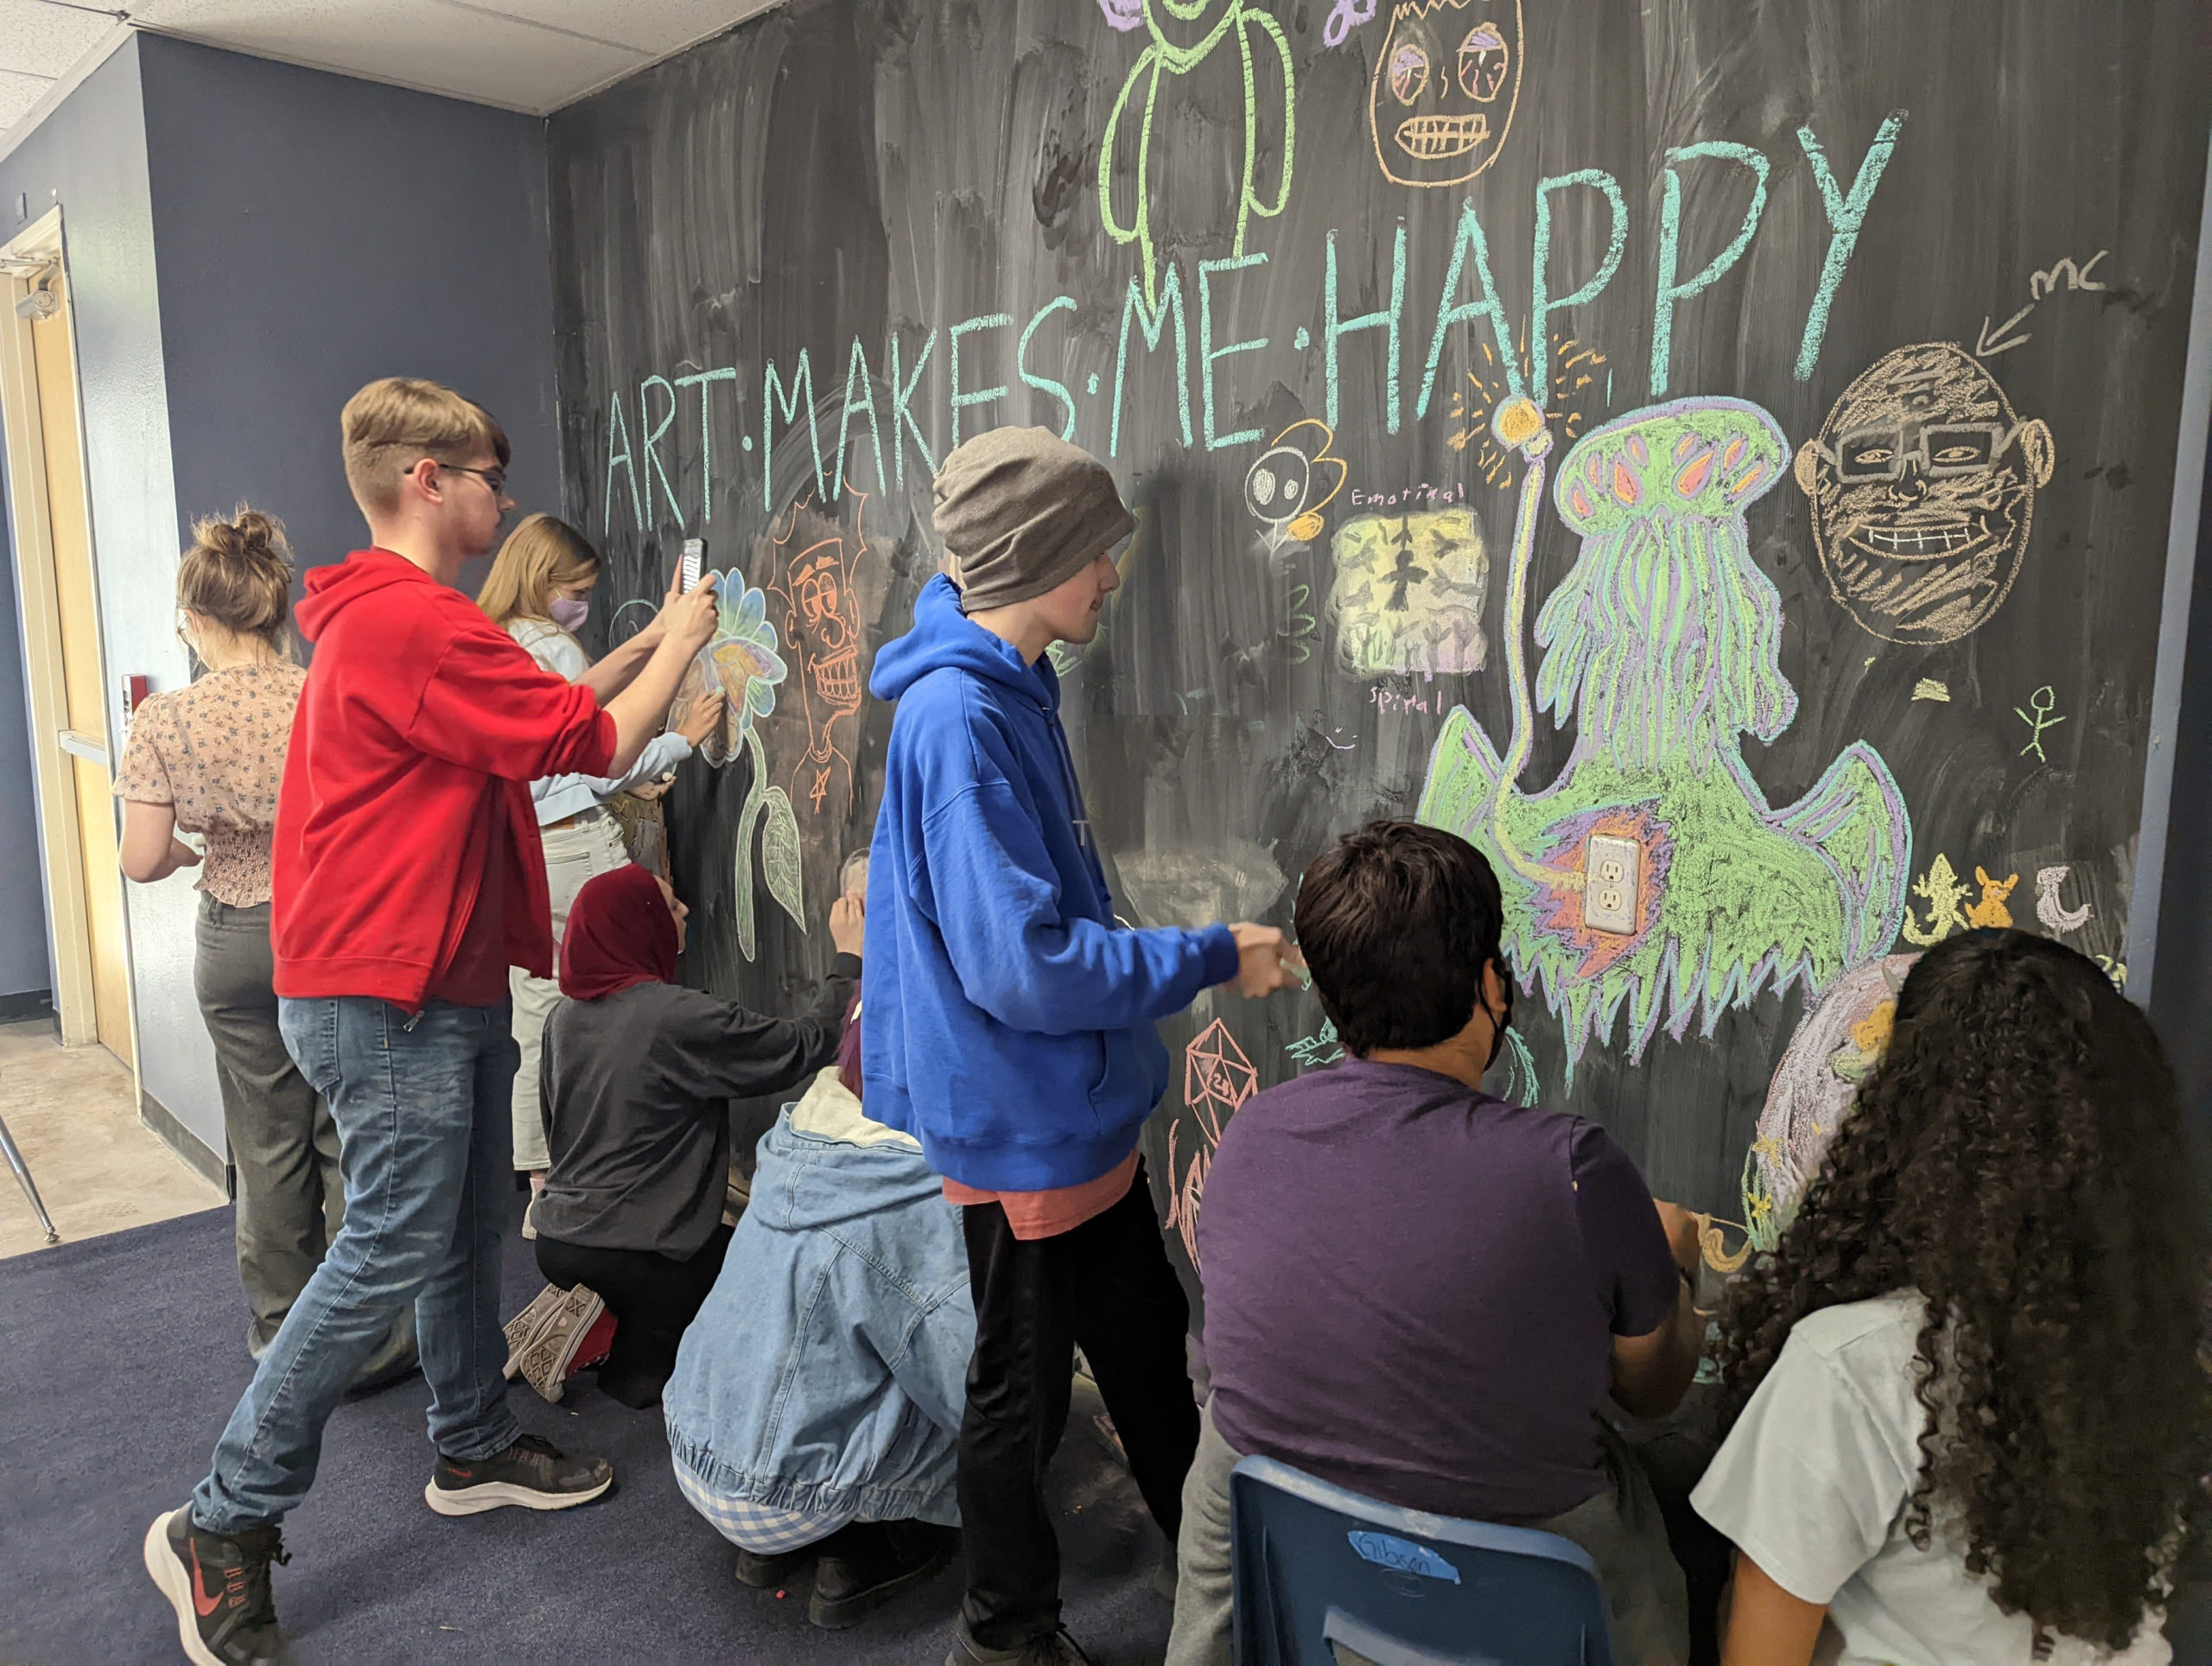 SET High students create a collaborative work of art with the message, "ART MAKES ME HAPPY" on the Chalk Space wall.